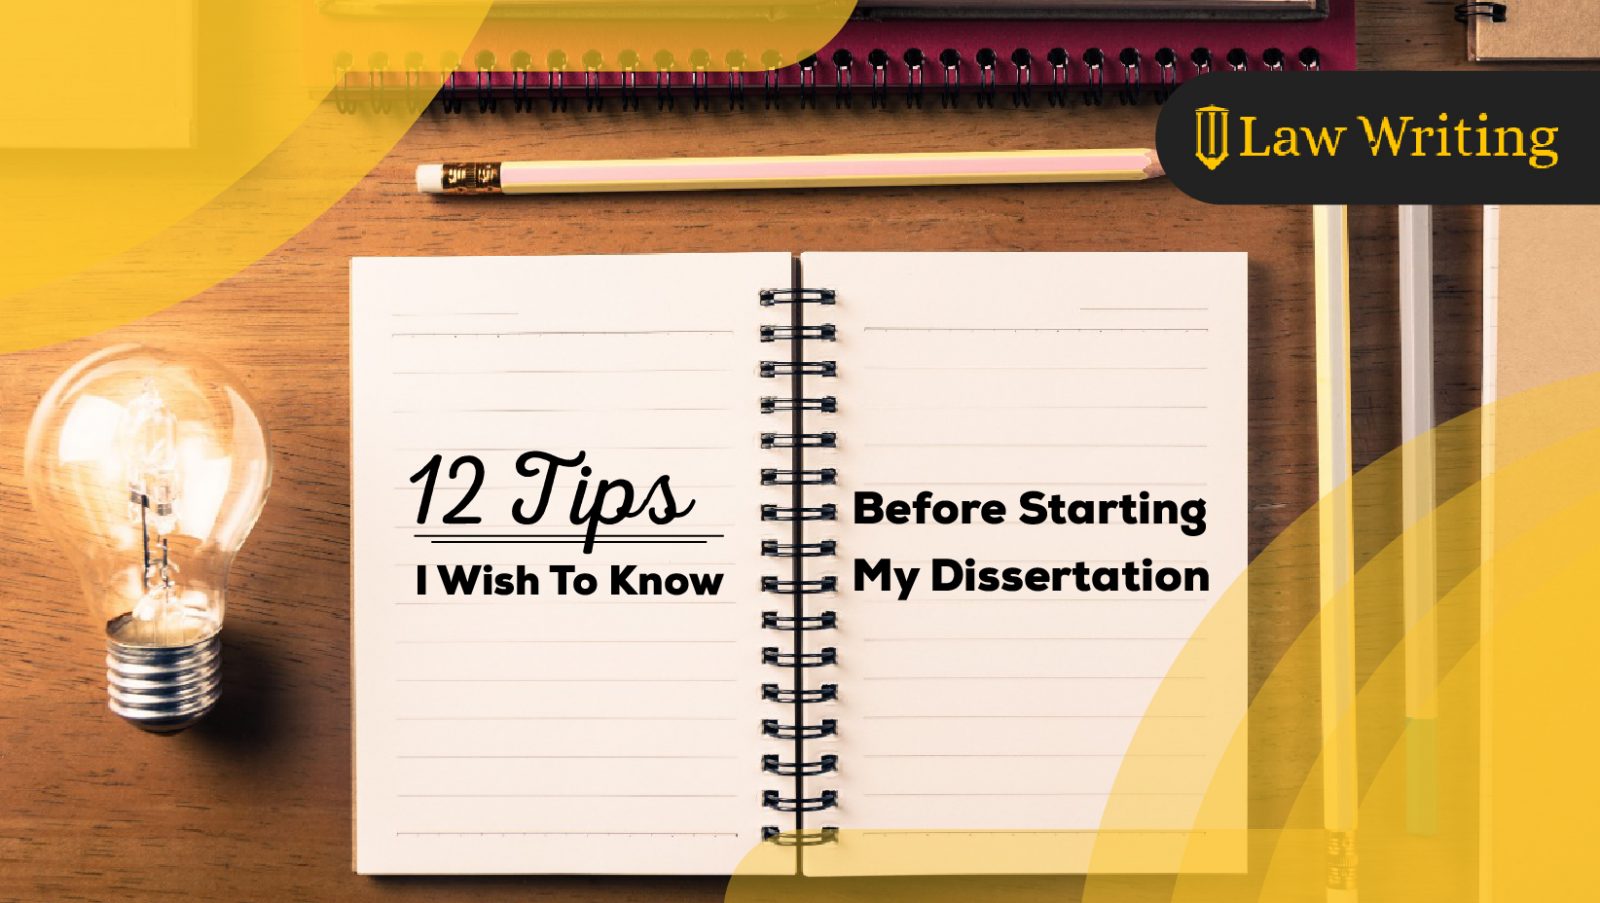 12 Tips I Wish To Know Before Starting My Dissertation-01